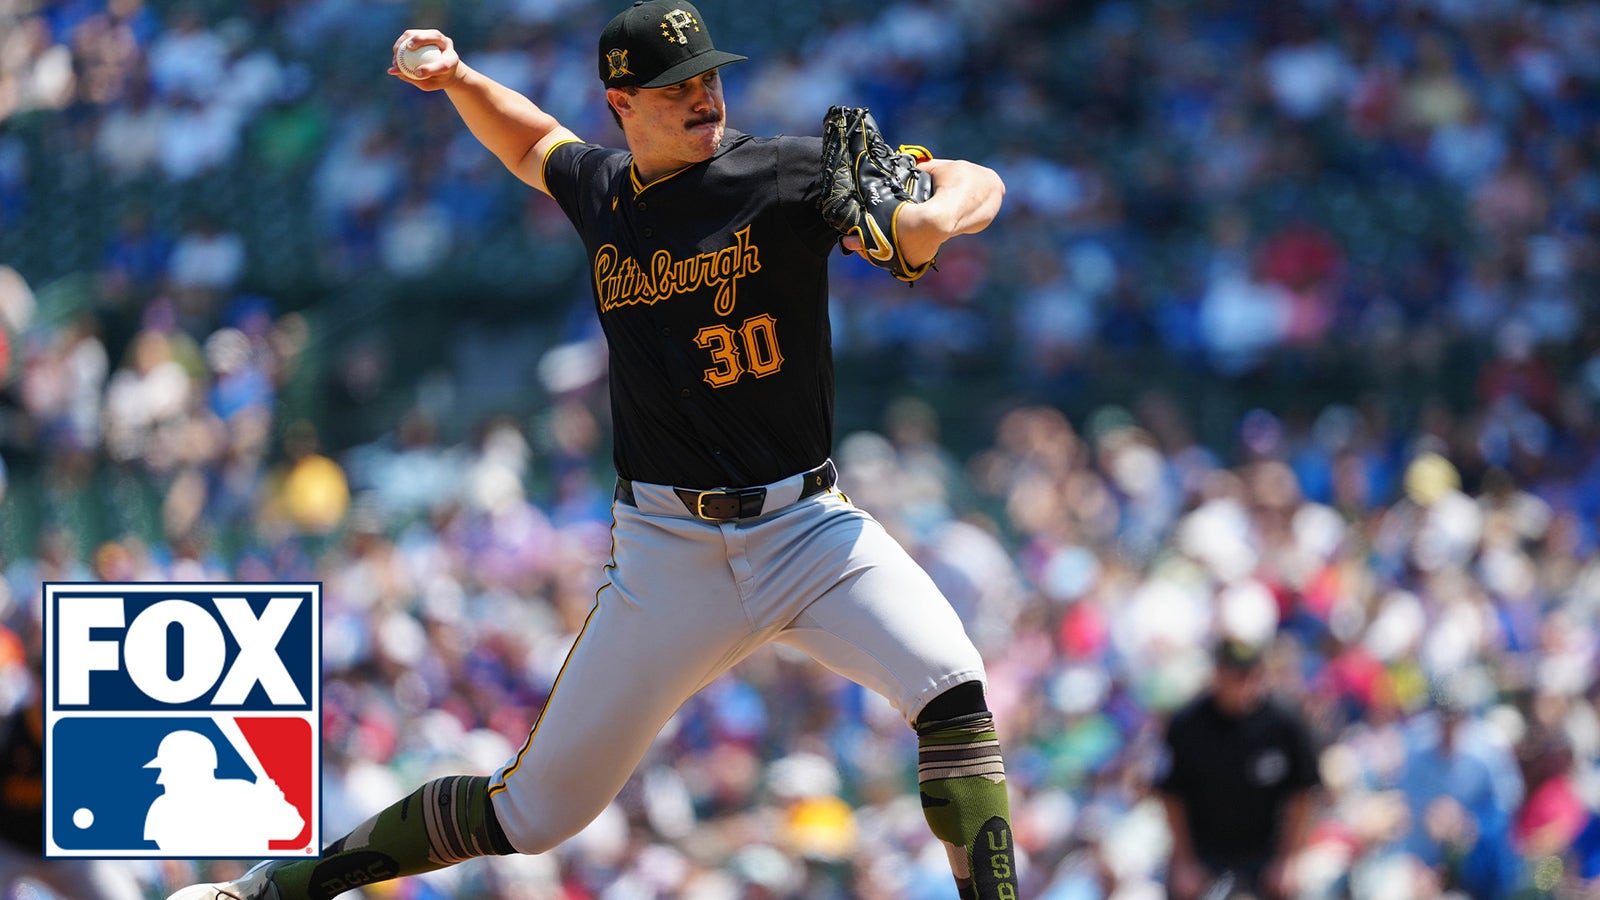 Pirates' Paul Skenes strikes out 11 batters in a no-hit, six-inning outing 